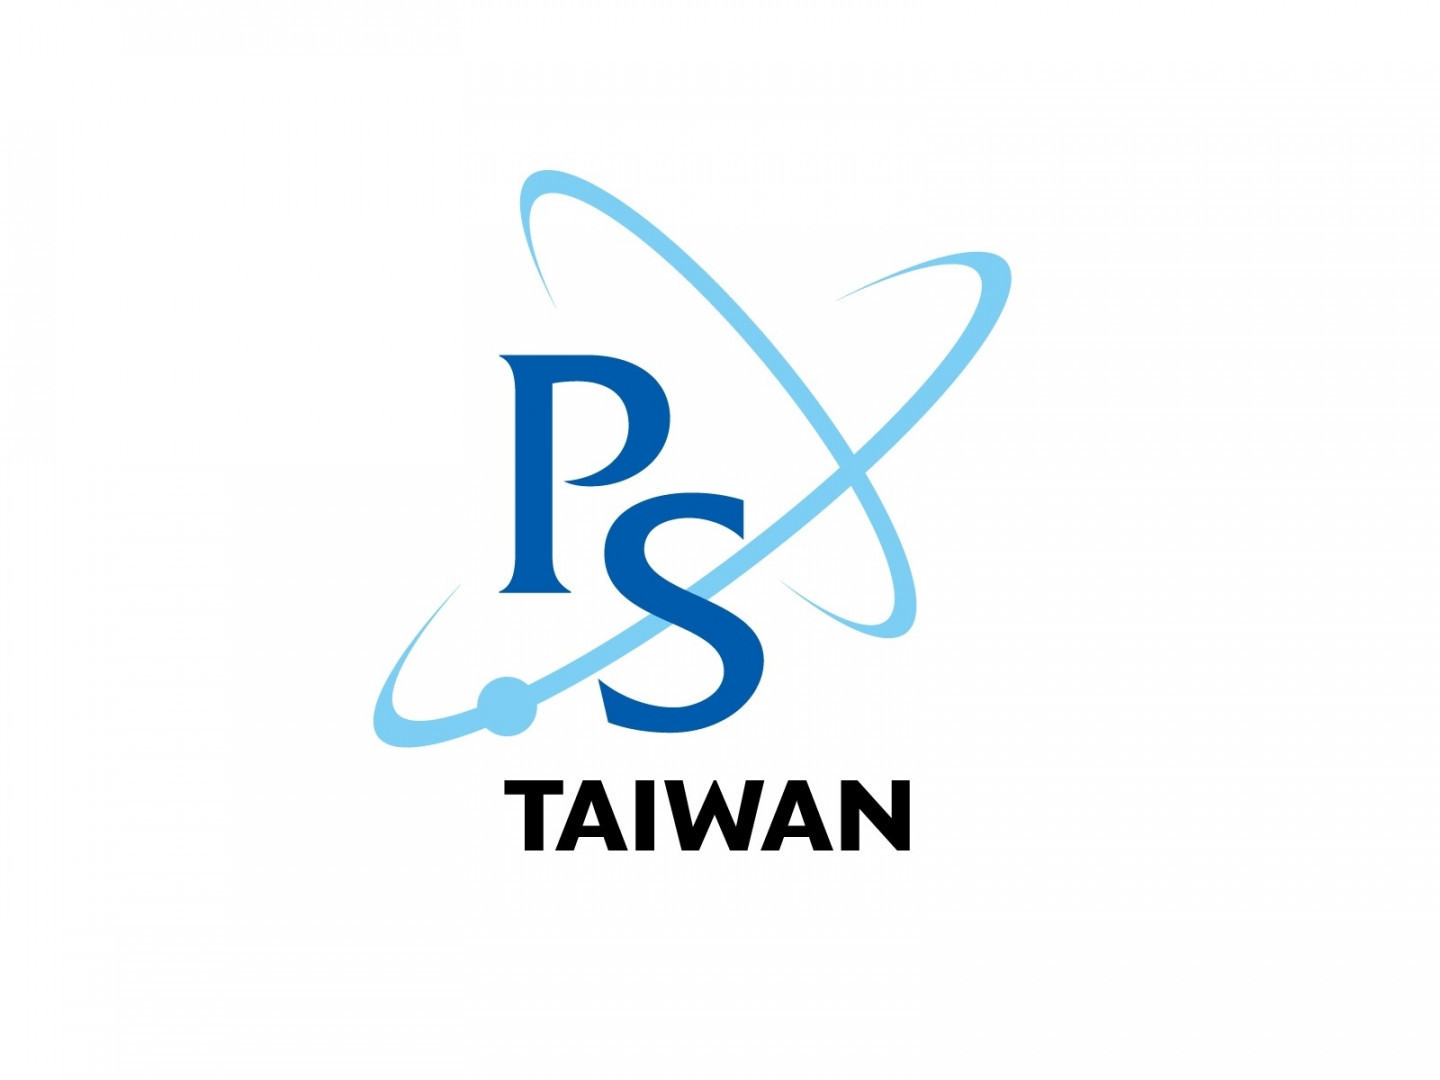  Faculty Positions - Department of Physics, National Chung Hsing University, Taichung, Taiwan 